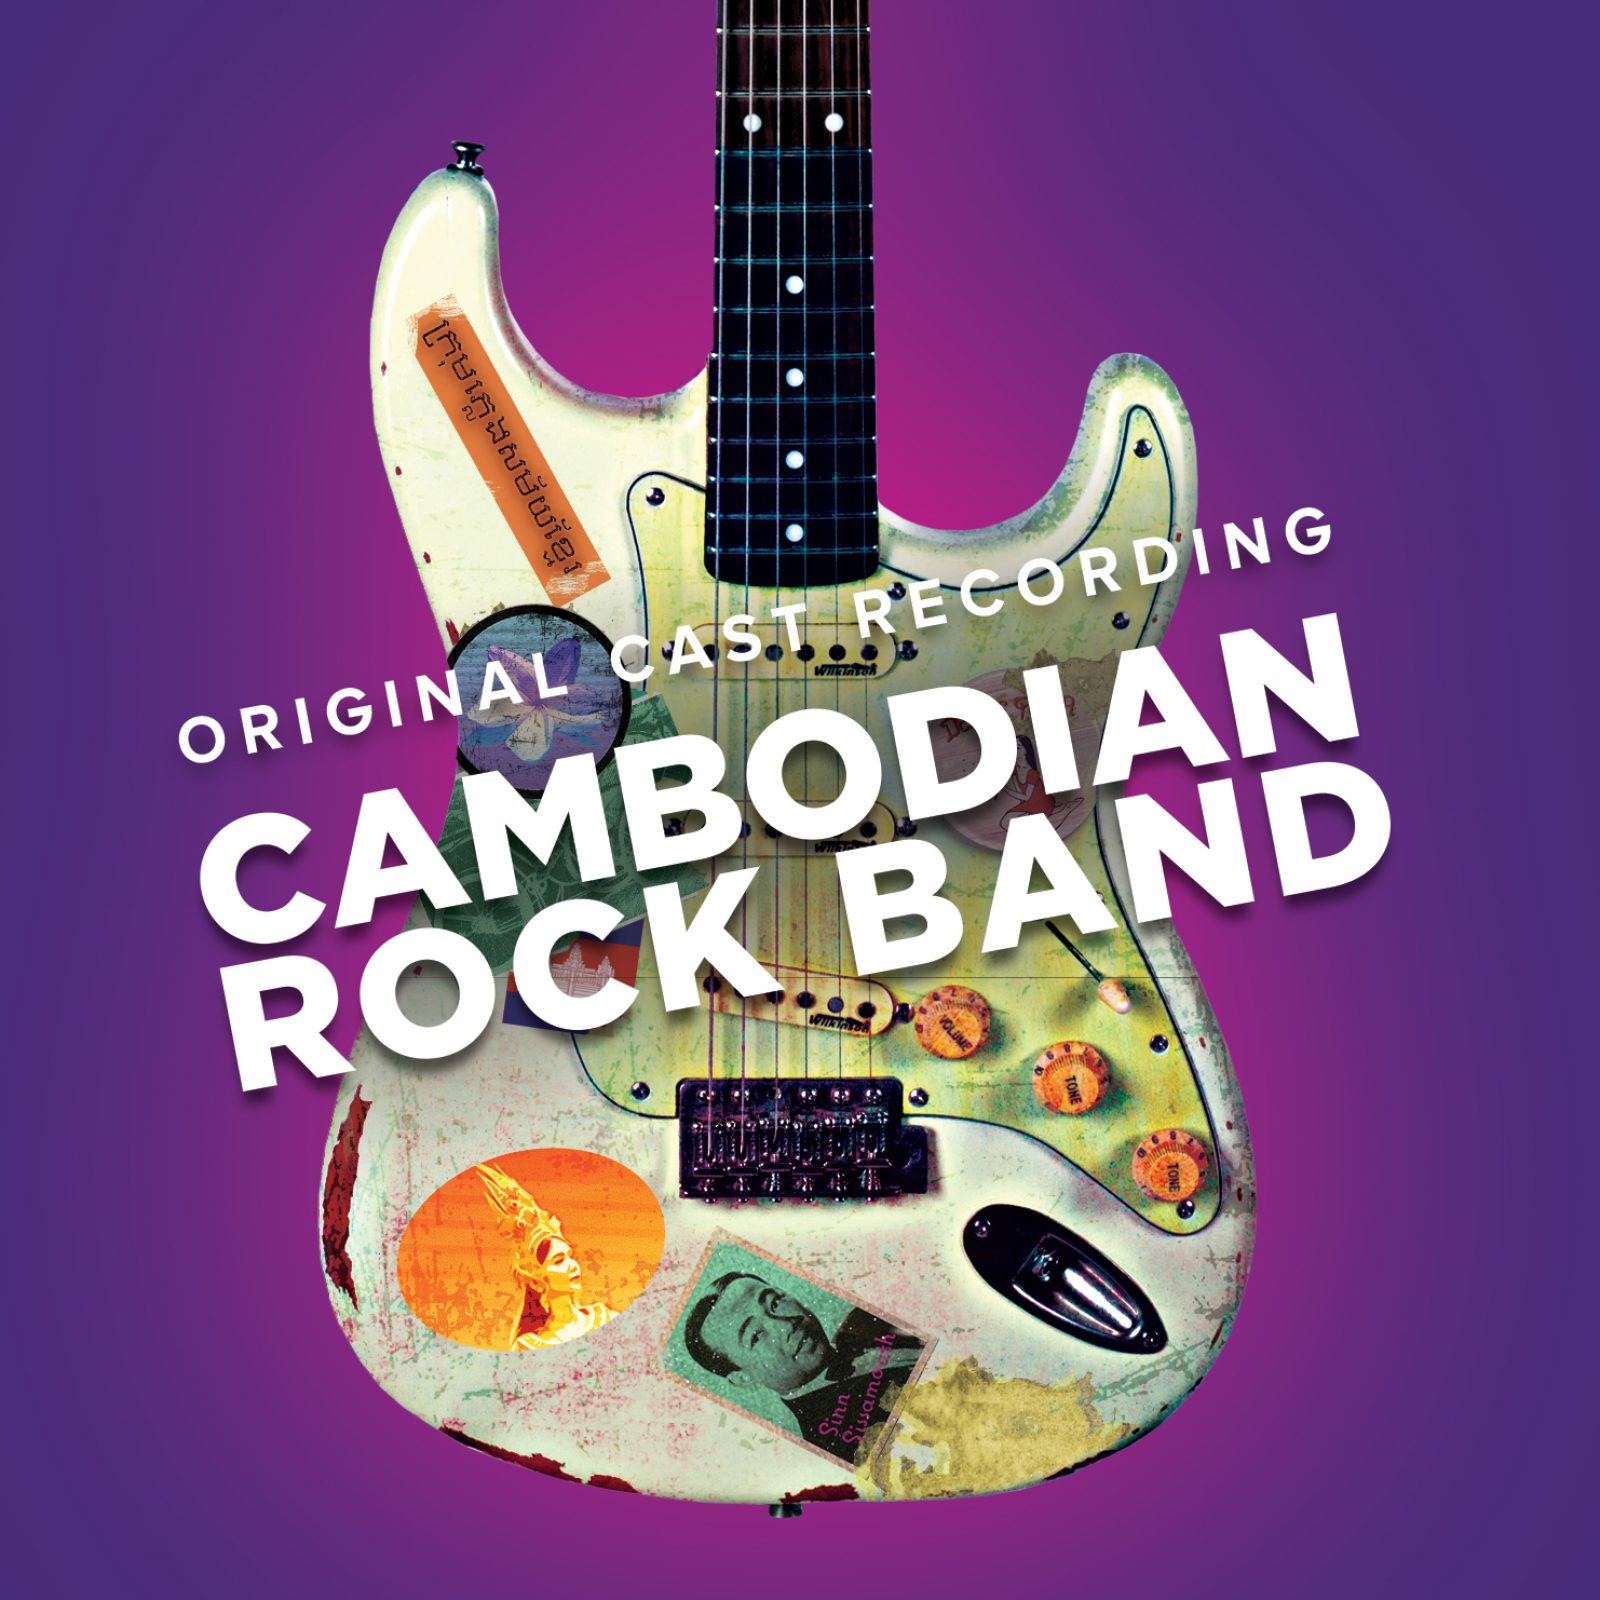 Cambodian Rock Band drops May 8th!!! Read all about it……